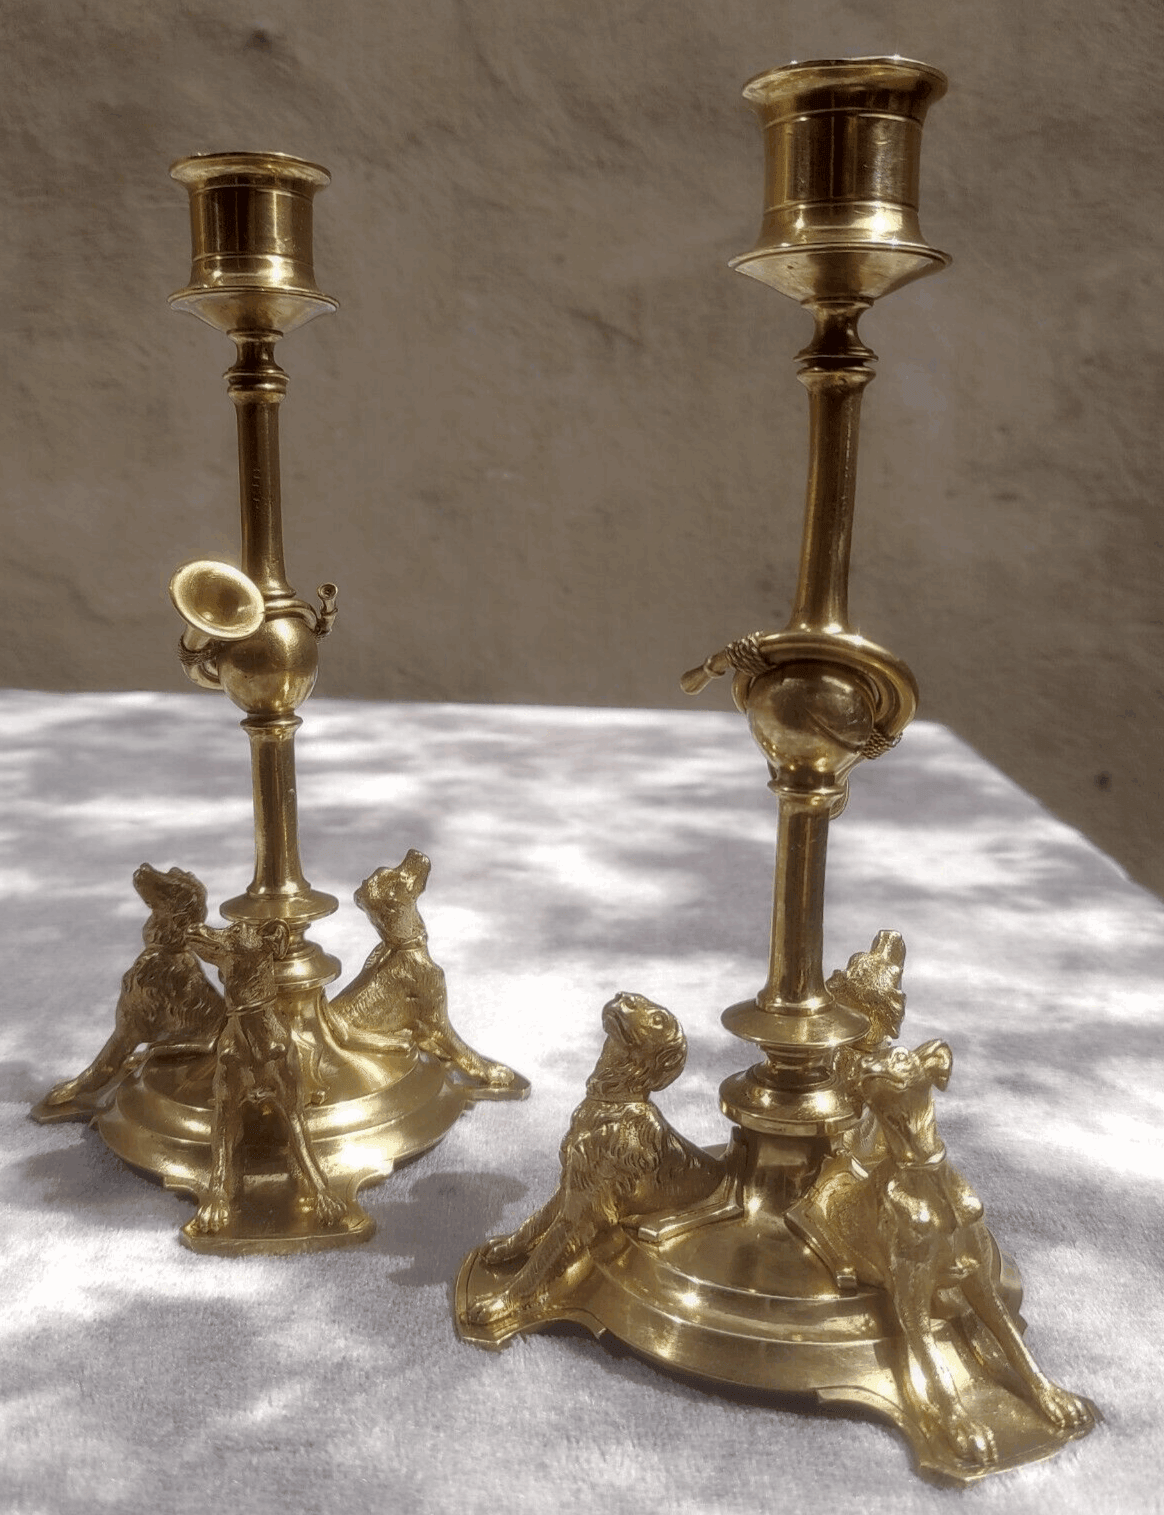 19th Century Antique Pair of Brass Hunting Dog Trophy Candlestick Holders - 20 cm